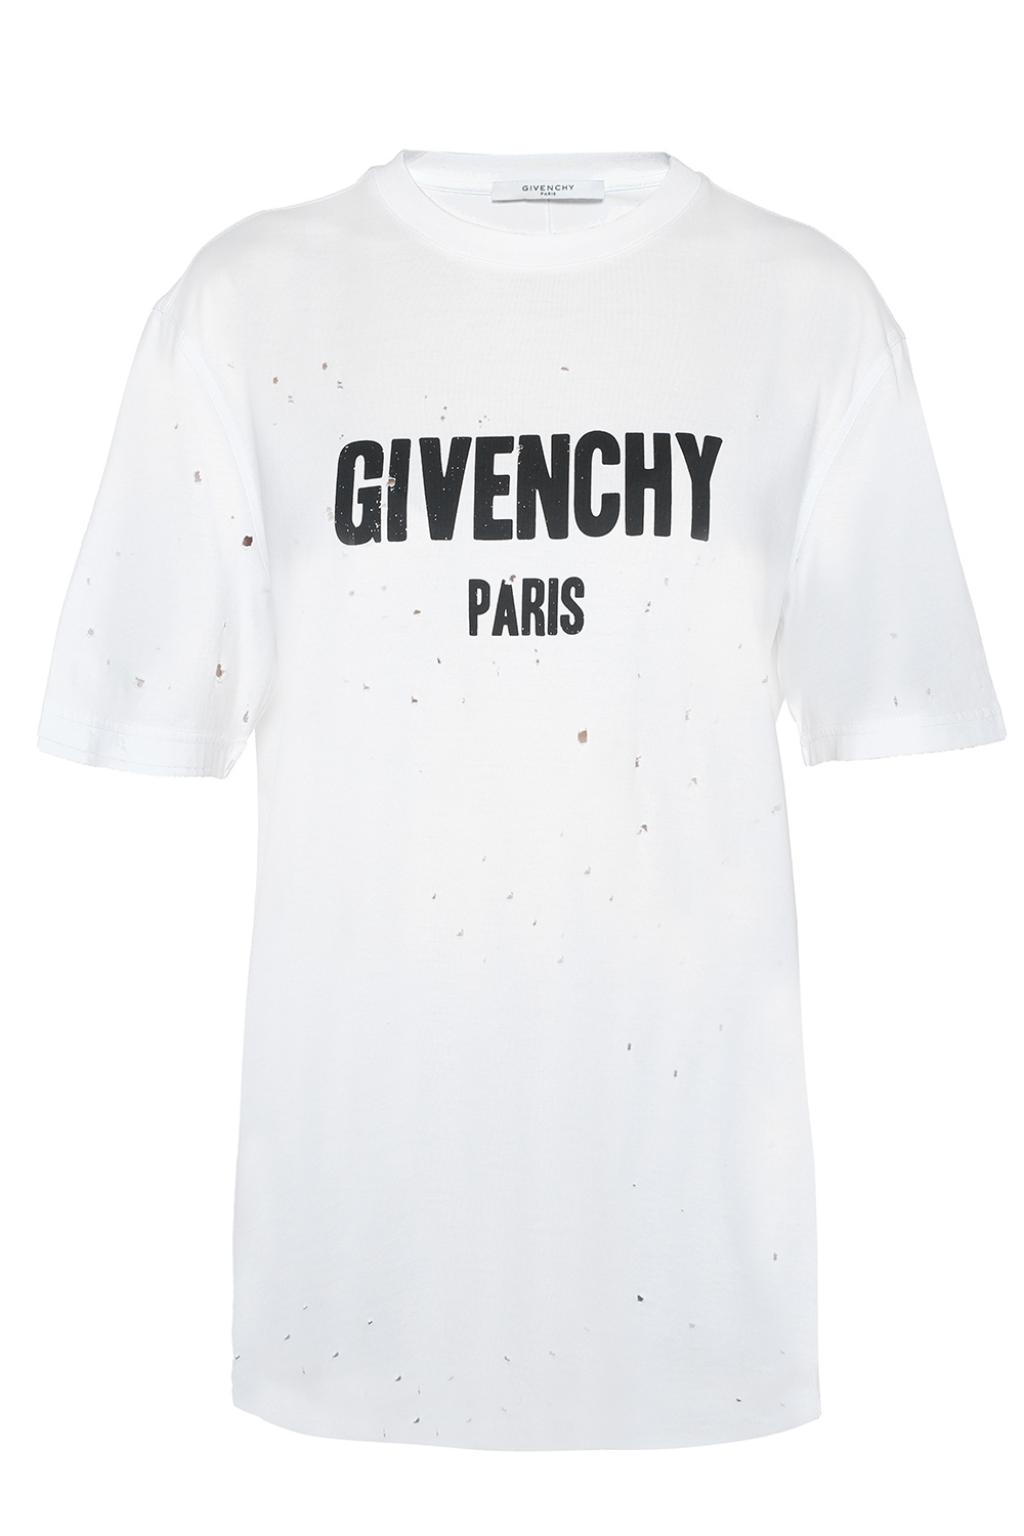 givenchy sweater holes